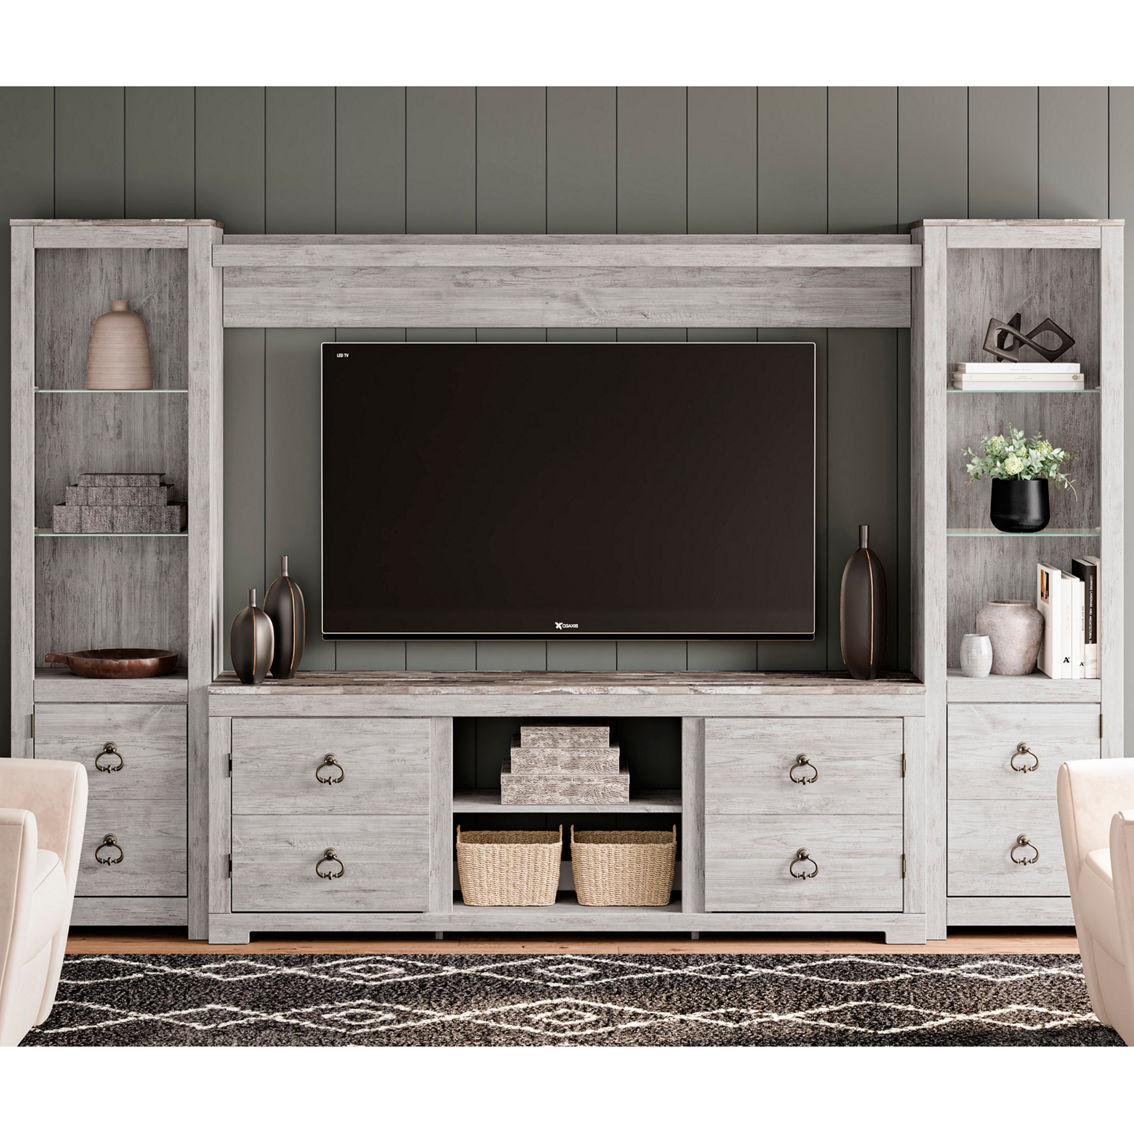 Signature Design by Ashley Willowton Entertainment Center 4 pc. - Image 5 of 5